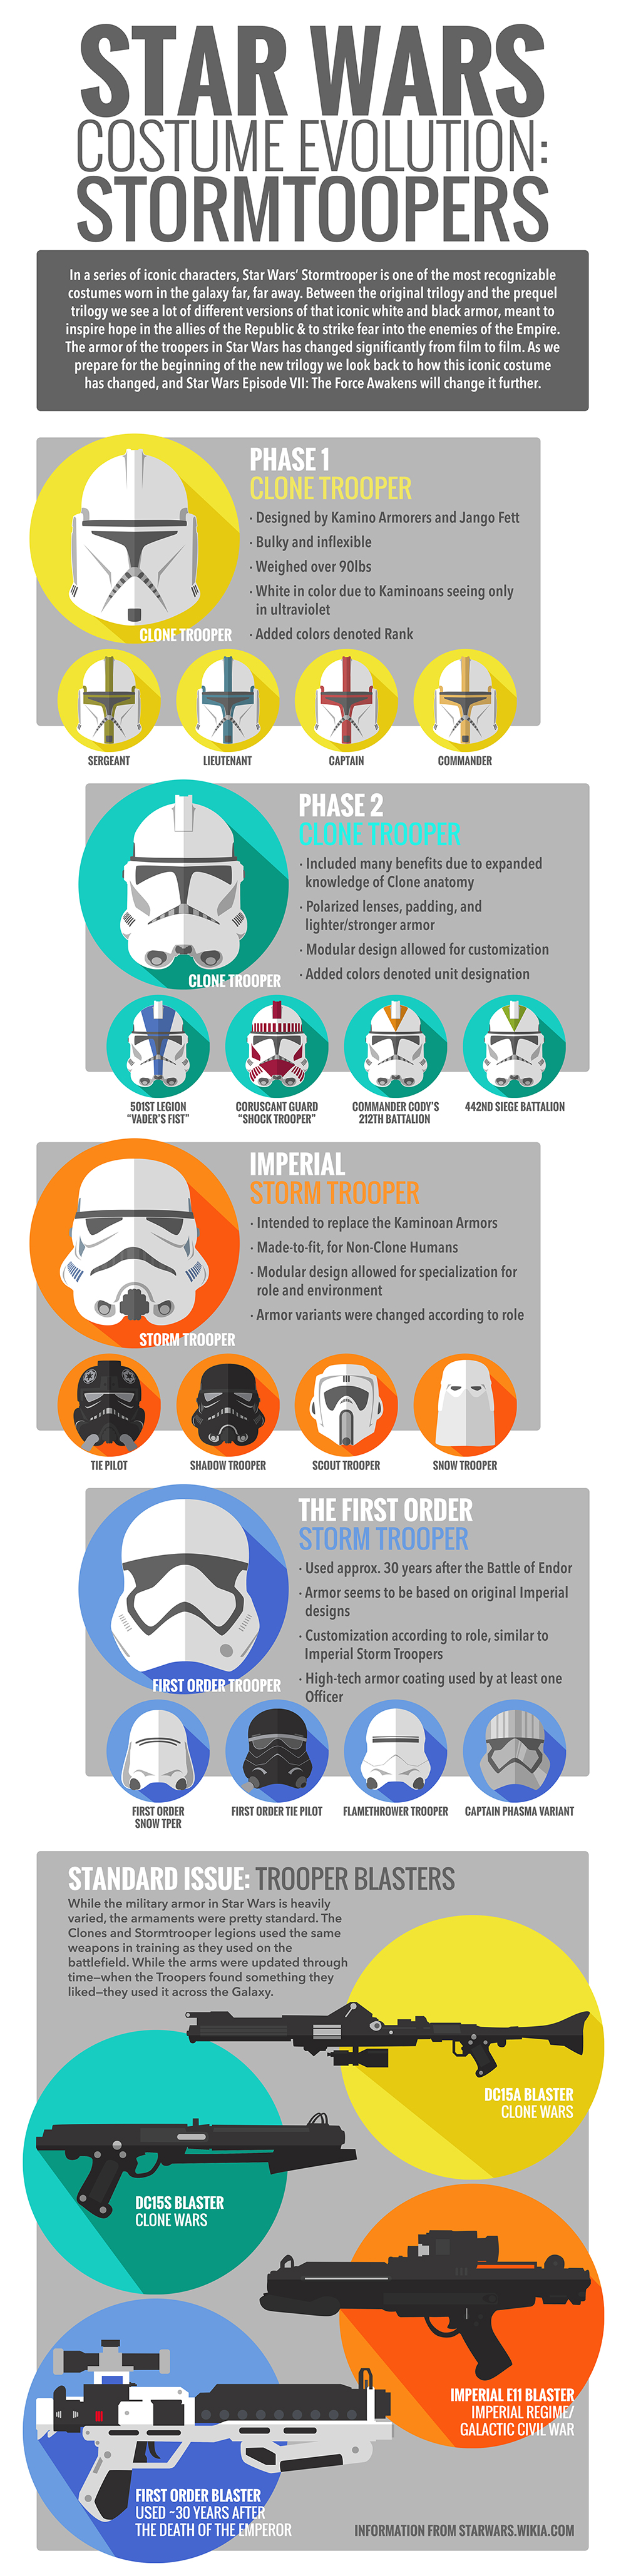 star-wars-costume-evolution-stormtroopers-infographic